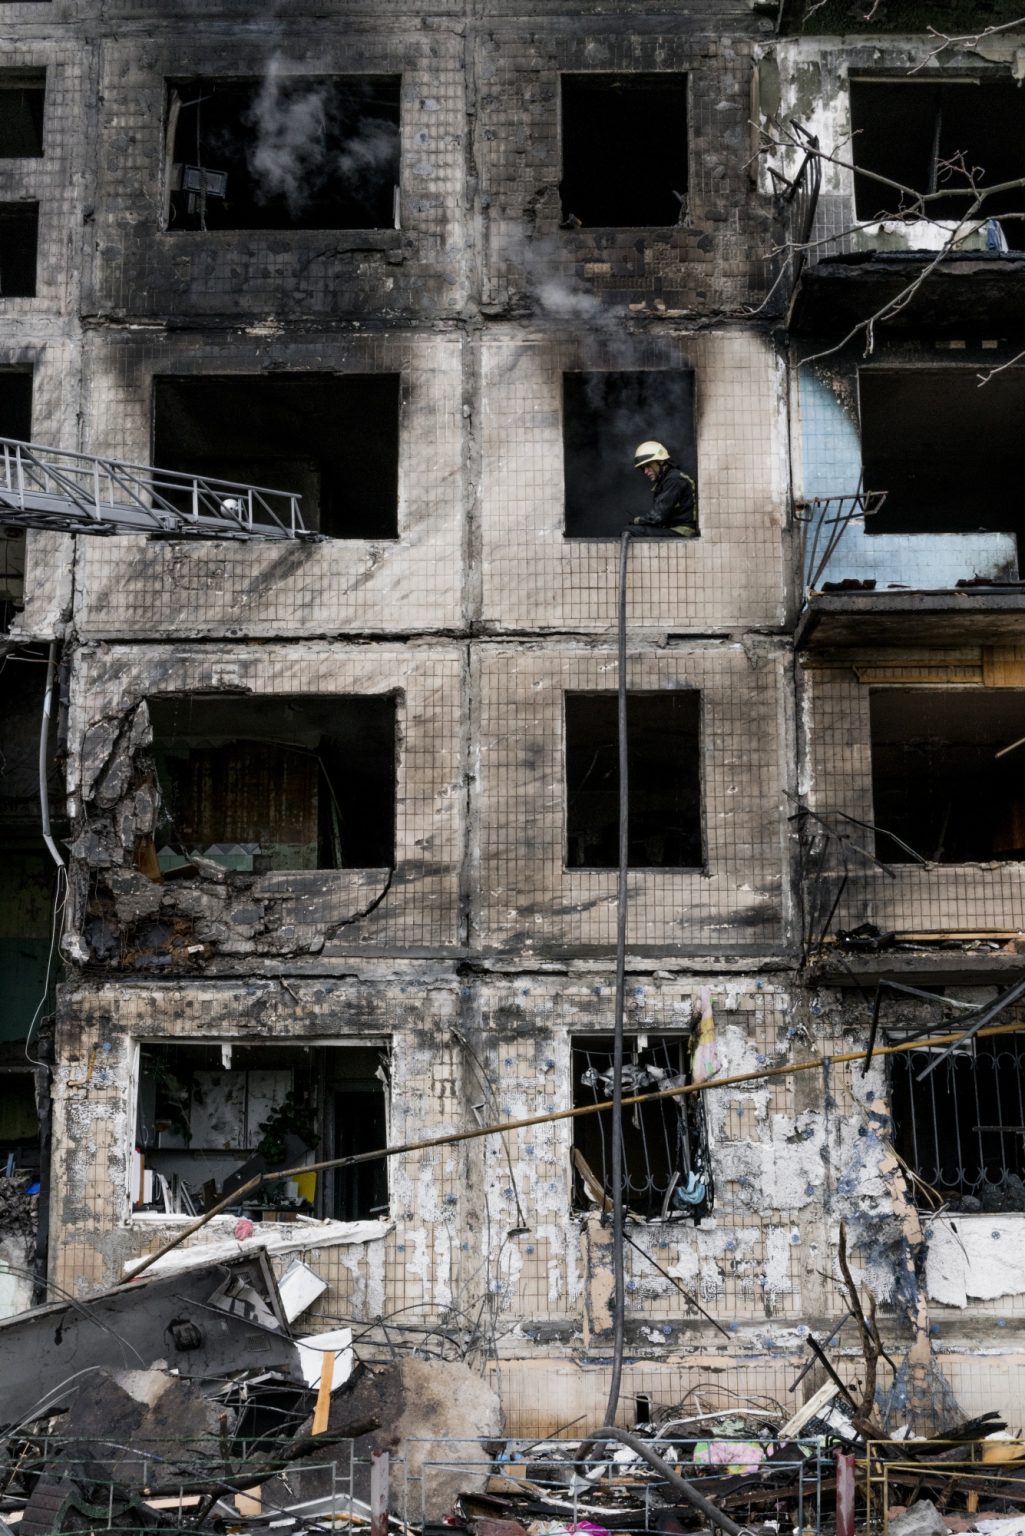 UKRAINE, Kyiv. March 14, 2022 - A building damaged by shelling in Kyiv.